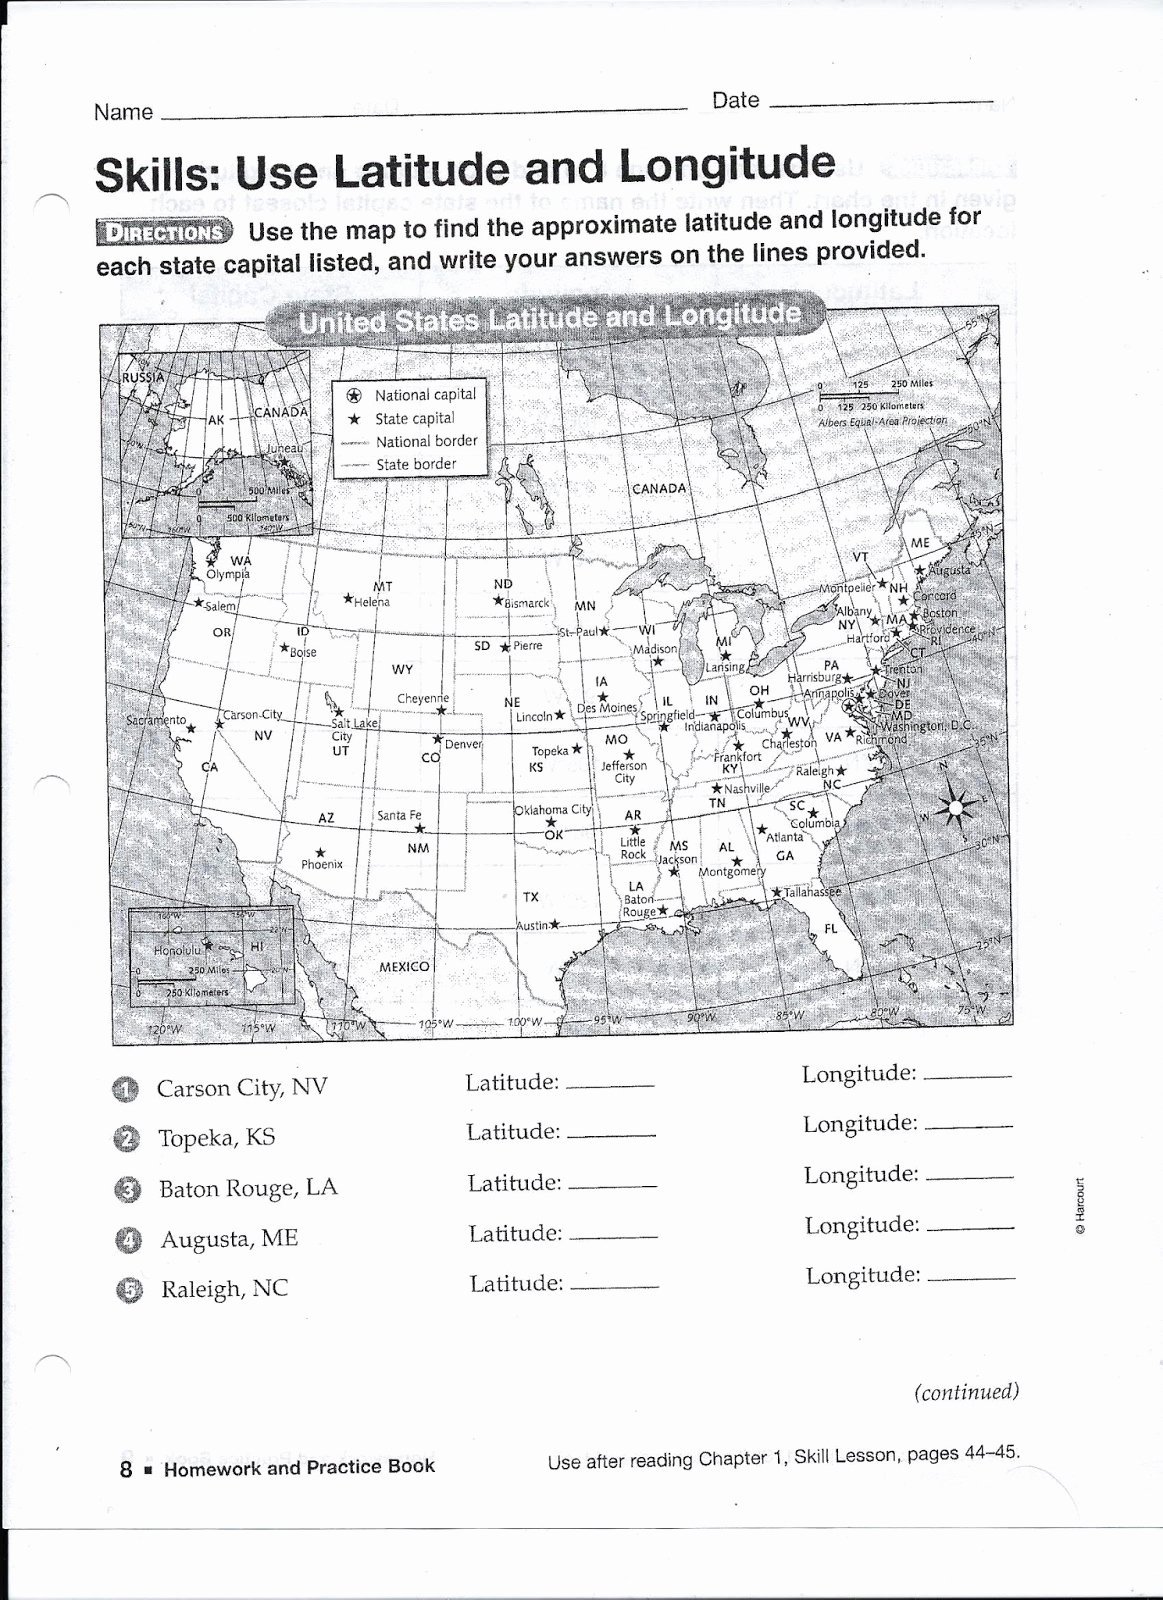 Latitude and Longitude Worksheet Answers Lovely Gms 6th Grade social Stu S August 2013